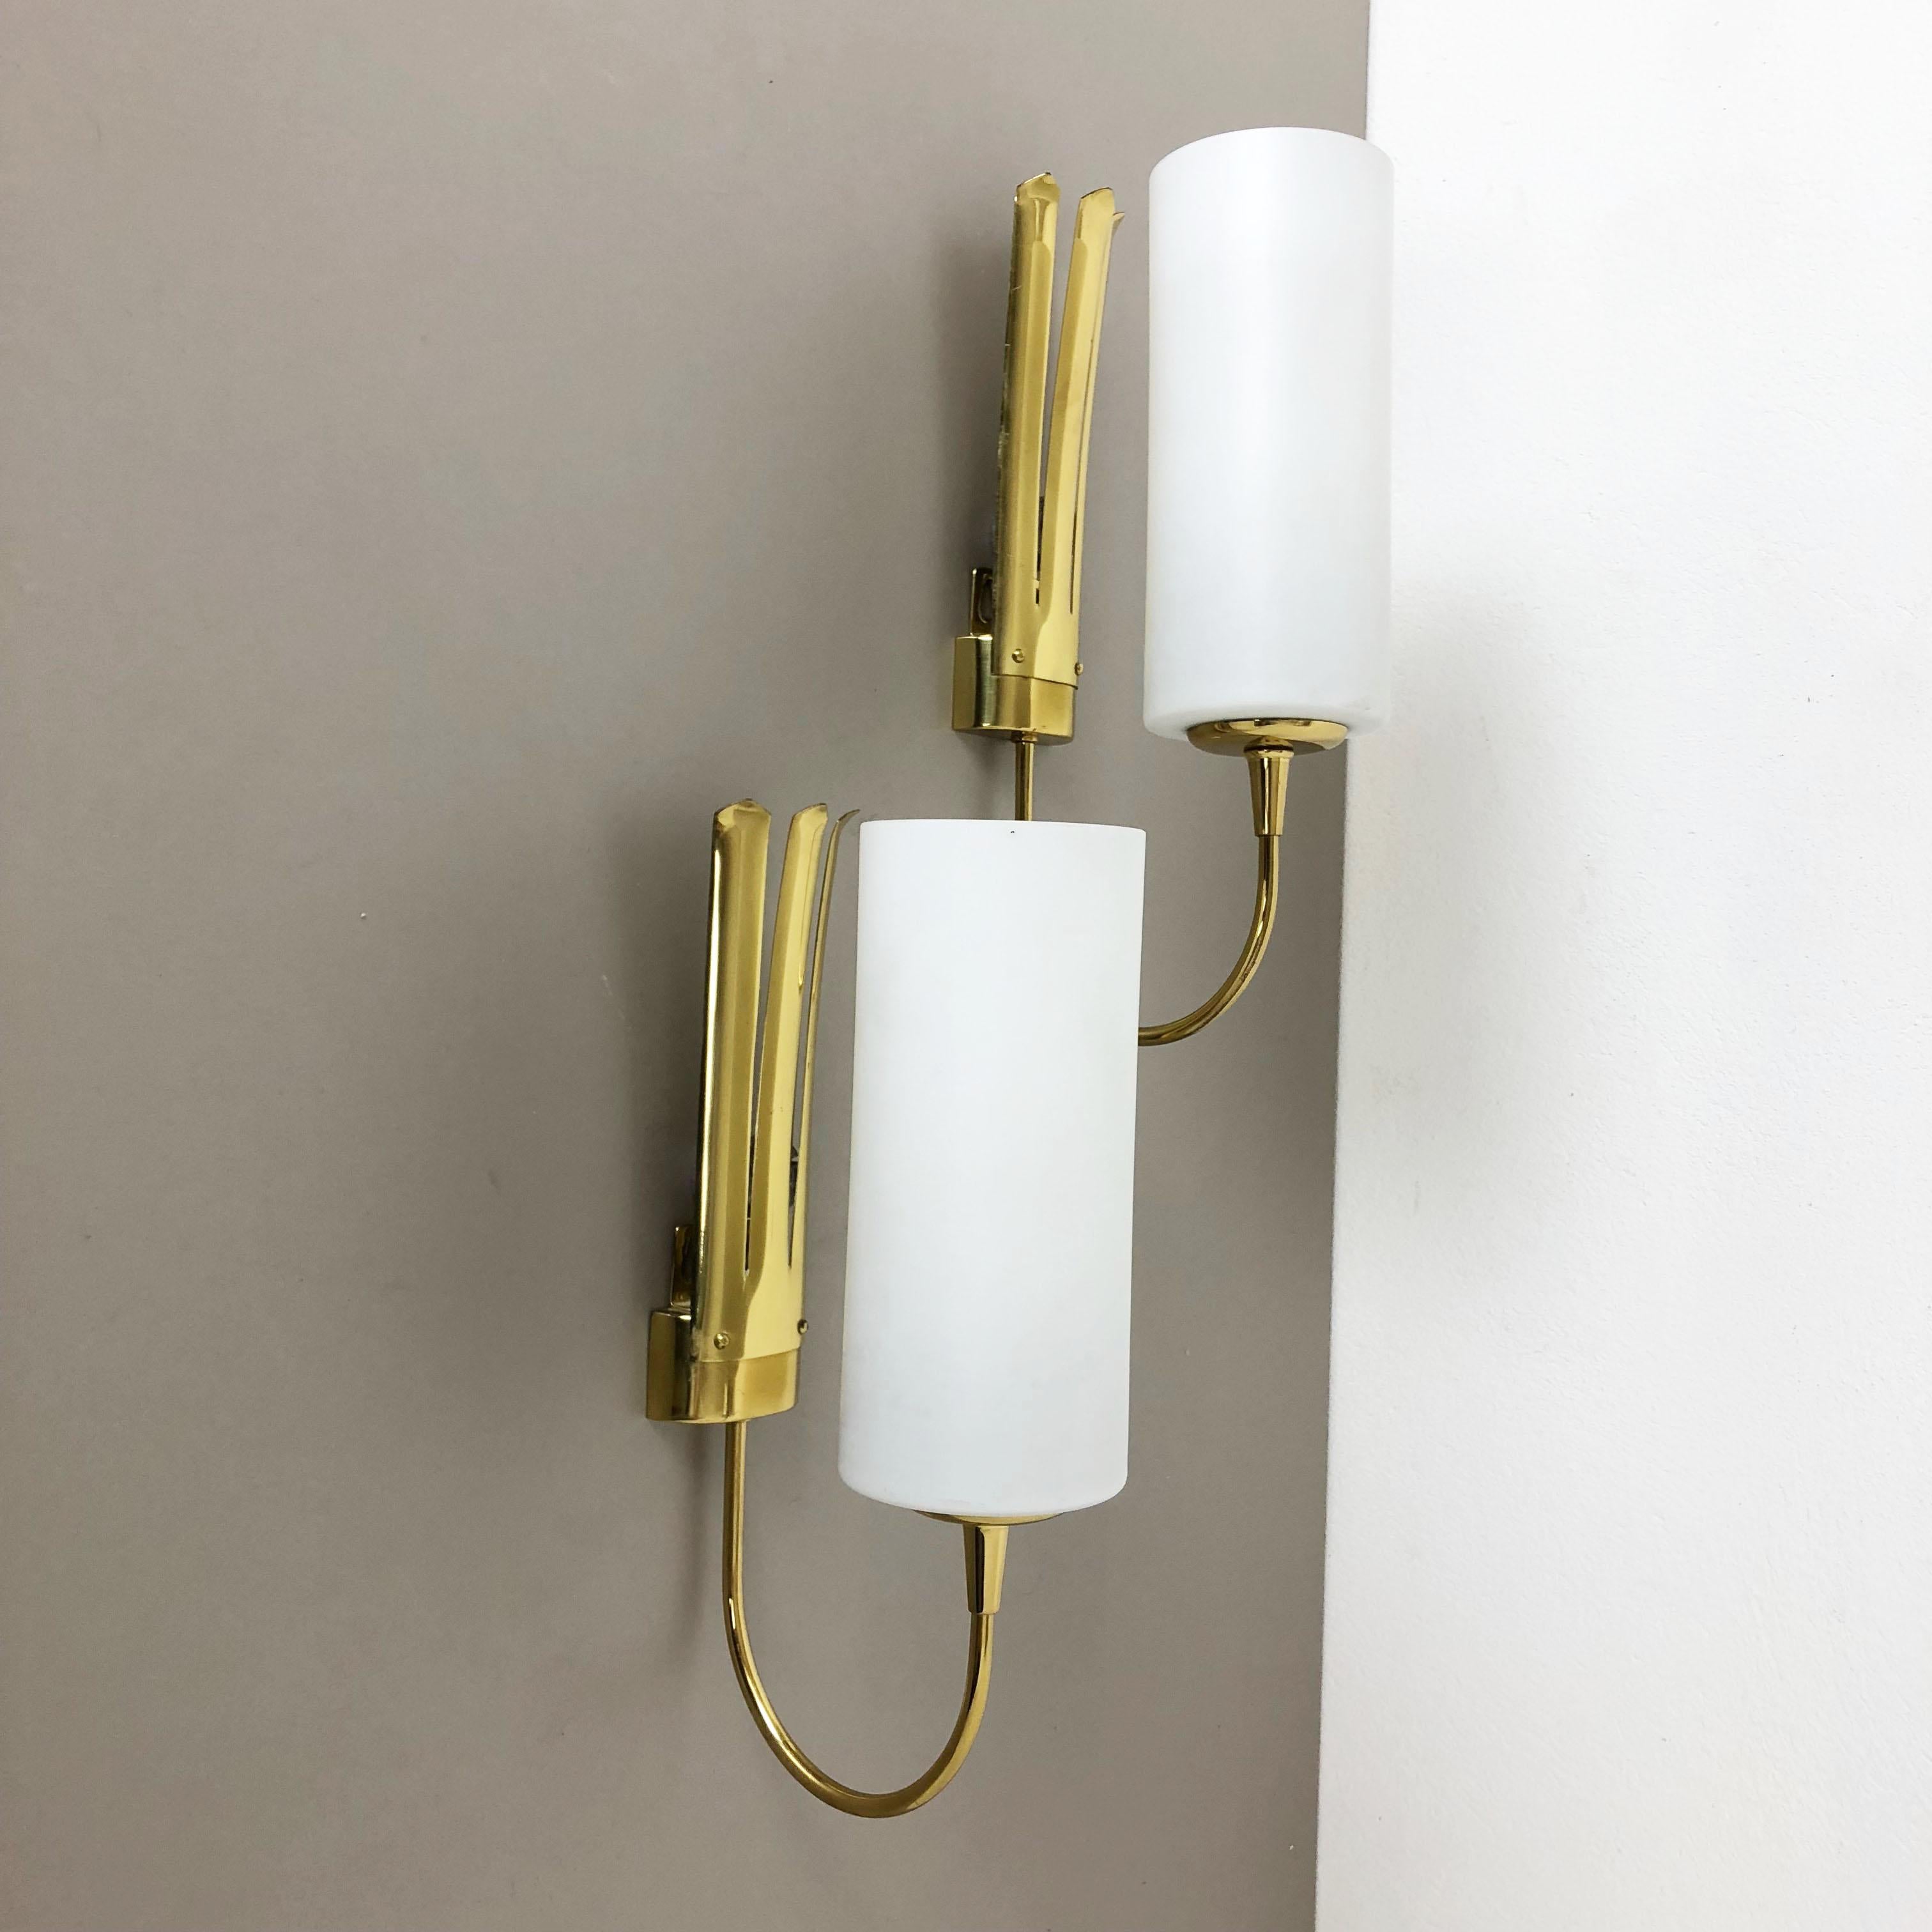 Set of Two Stilnovo Style Brass Italian Wall Lights Sconces, Italy, 1950s For Sale 1